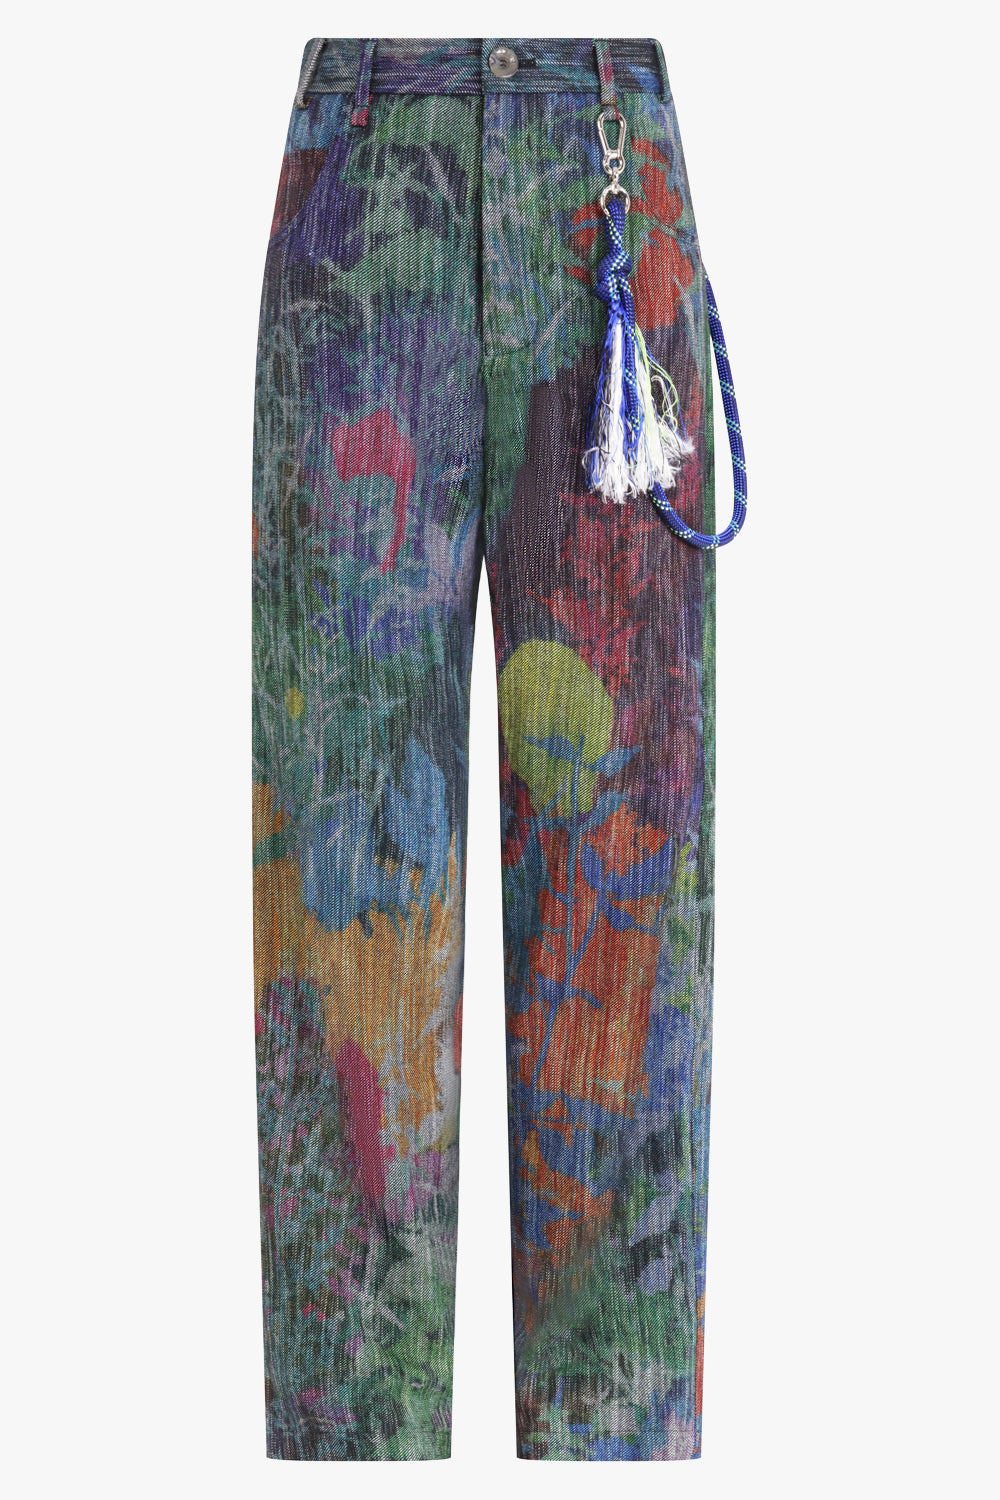 SONG FOR THE MUTE PANTS Long Work Pant | Multi